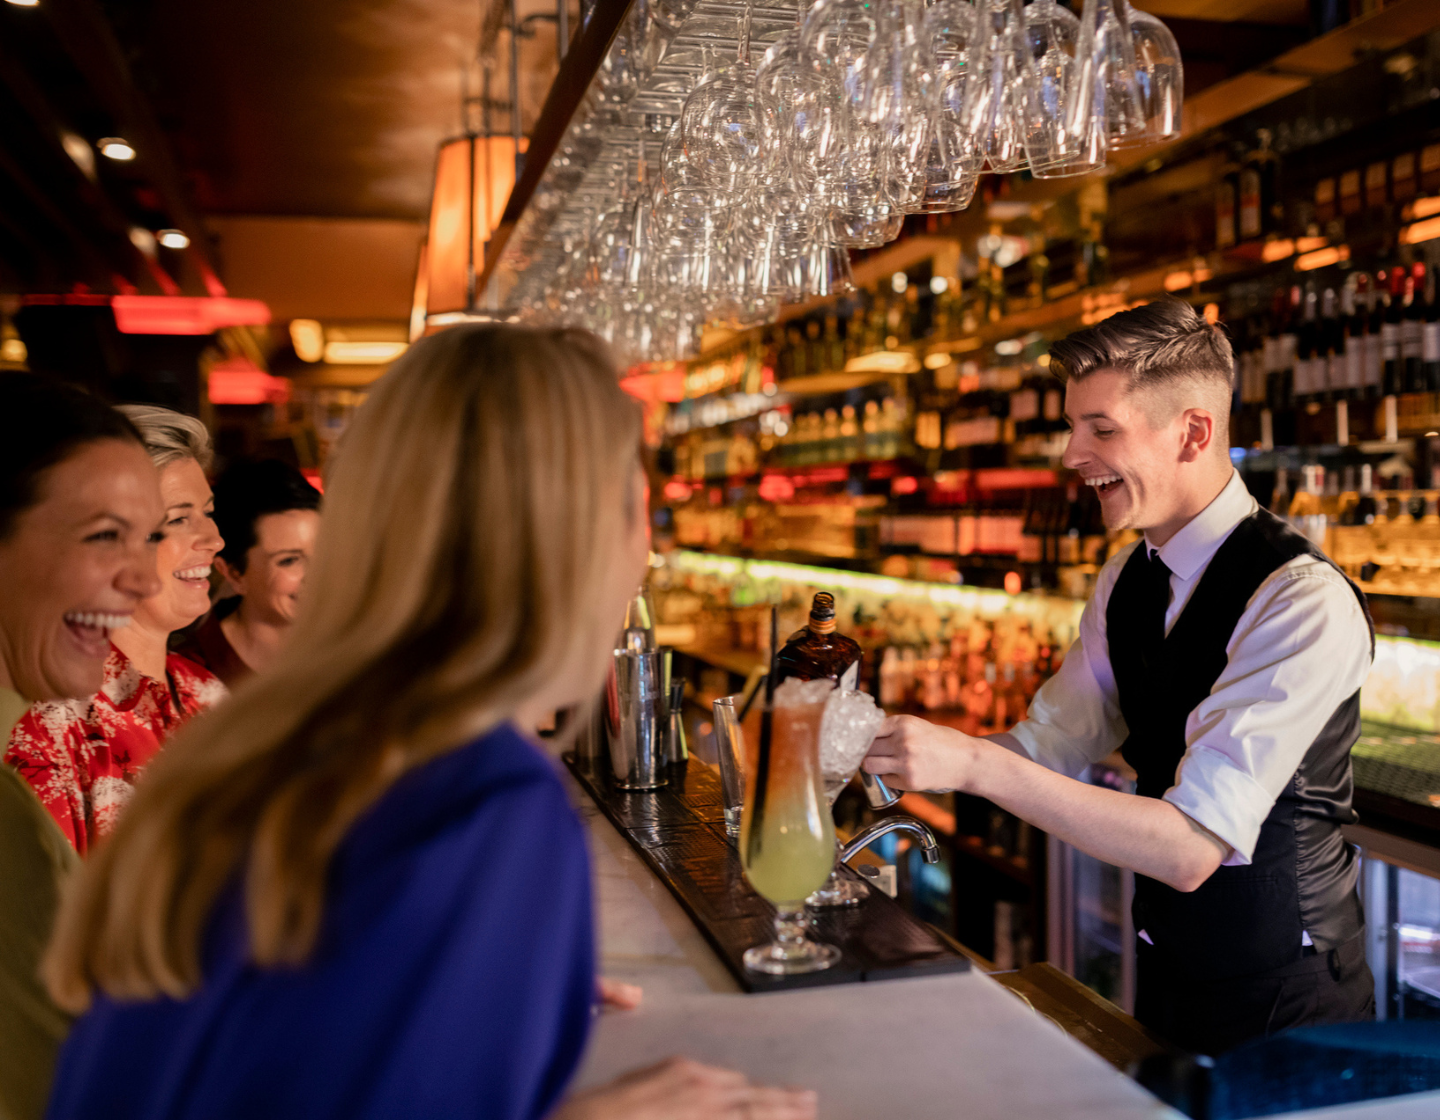 Bartender serving a customer a yellow cocktail